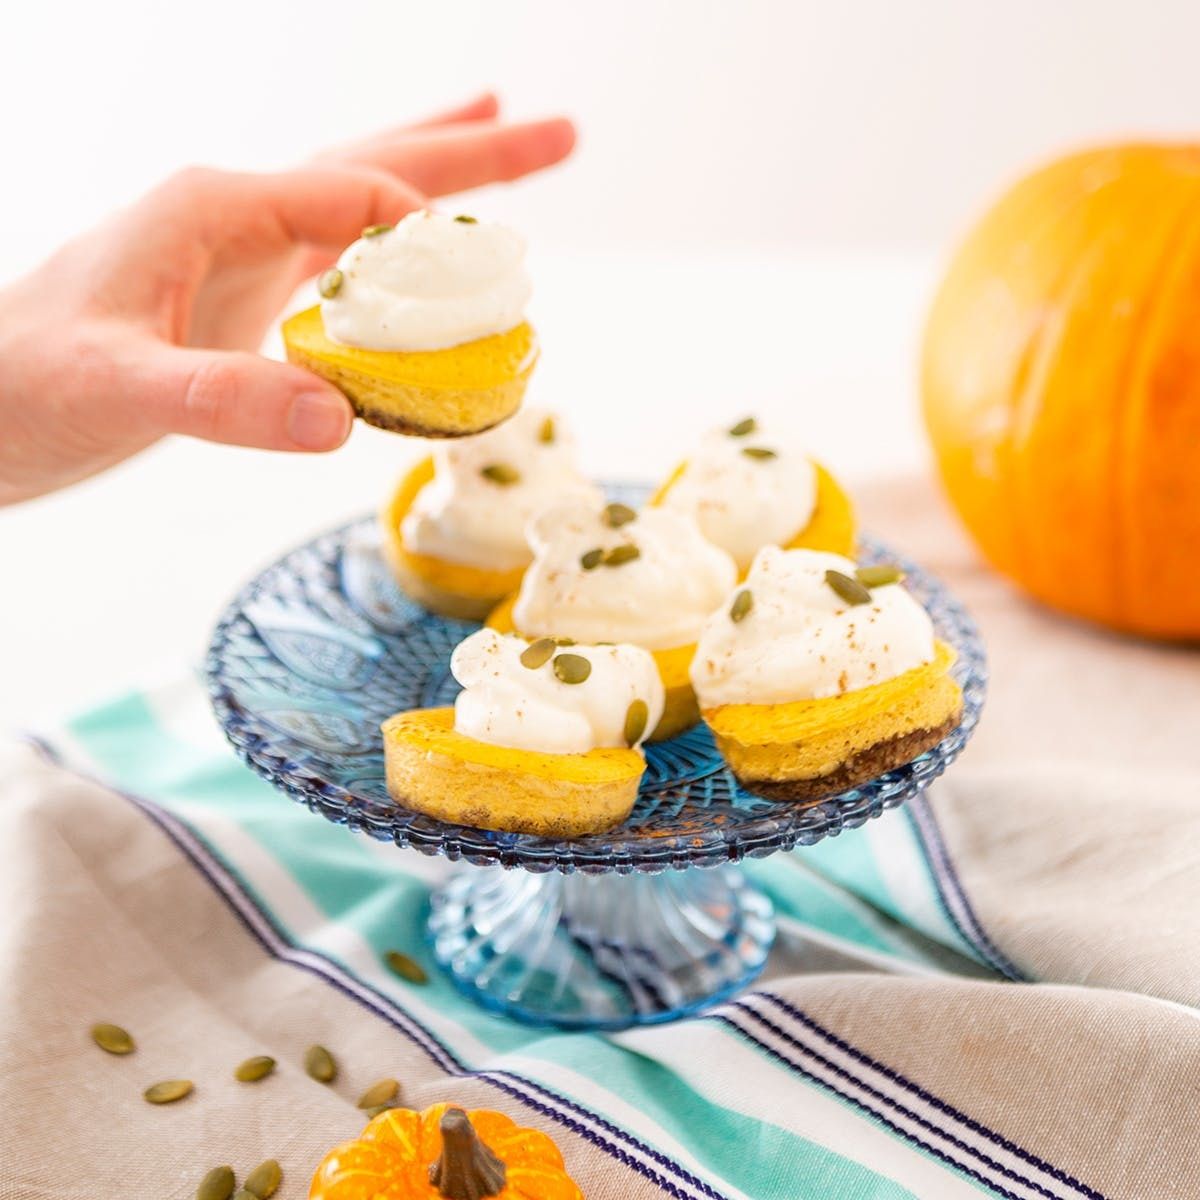 Don't Be Spooked! This Pumpkin Cheesecake Recipe Is Totally Keto